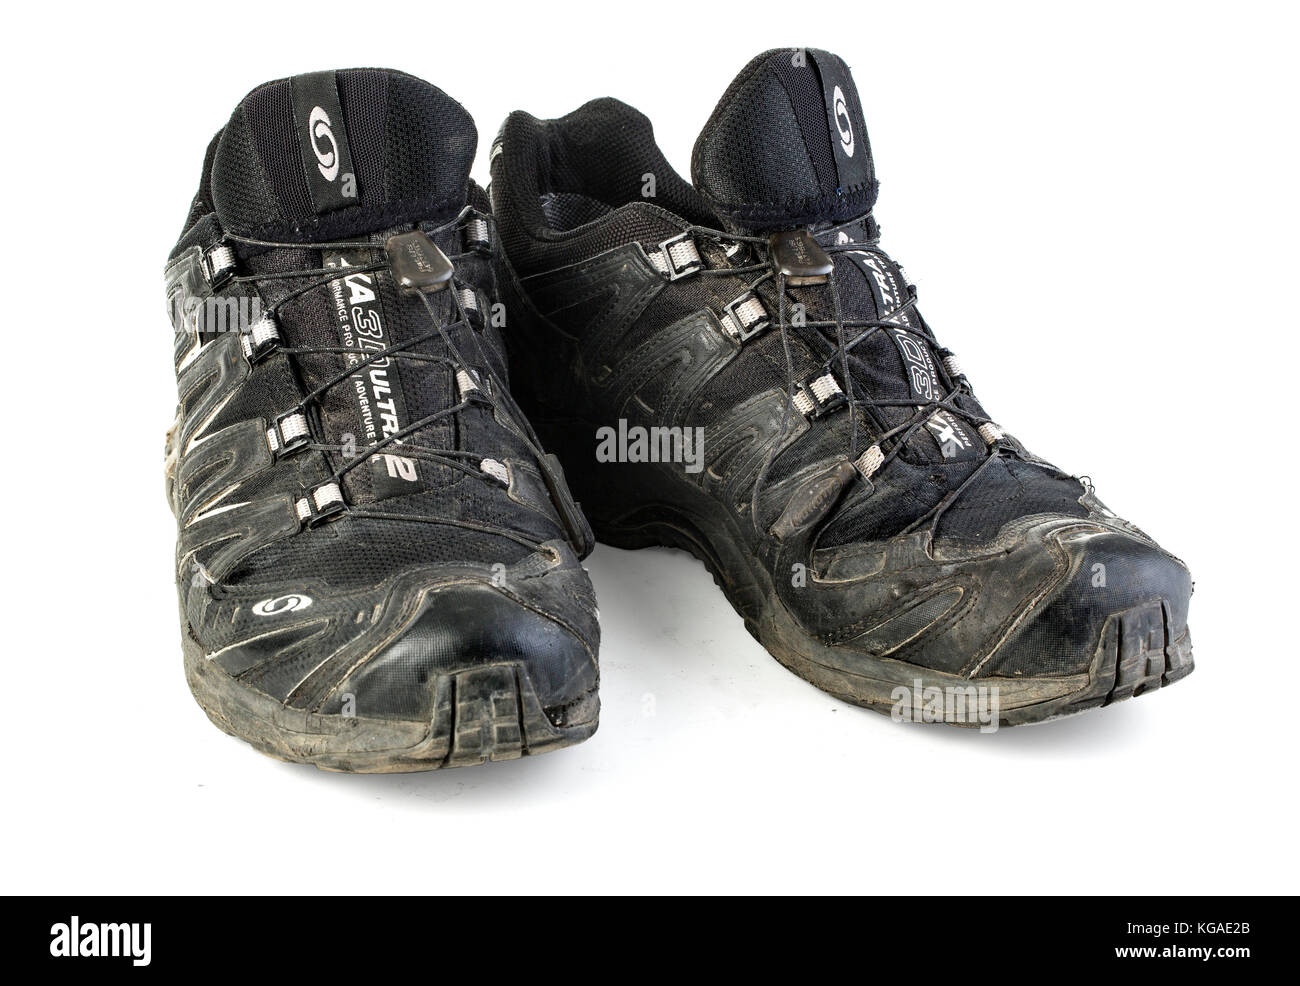 Chisinau, Moldova - December 24, 2015:: A pair of worn, ripped and dirty  Salomon trail running shoes over white background Stock Photo - Alamy